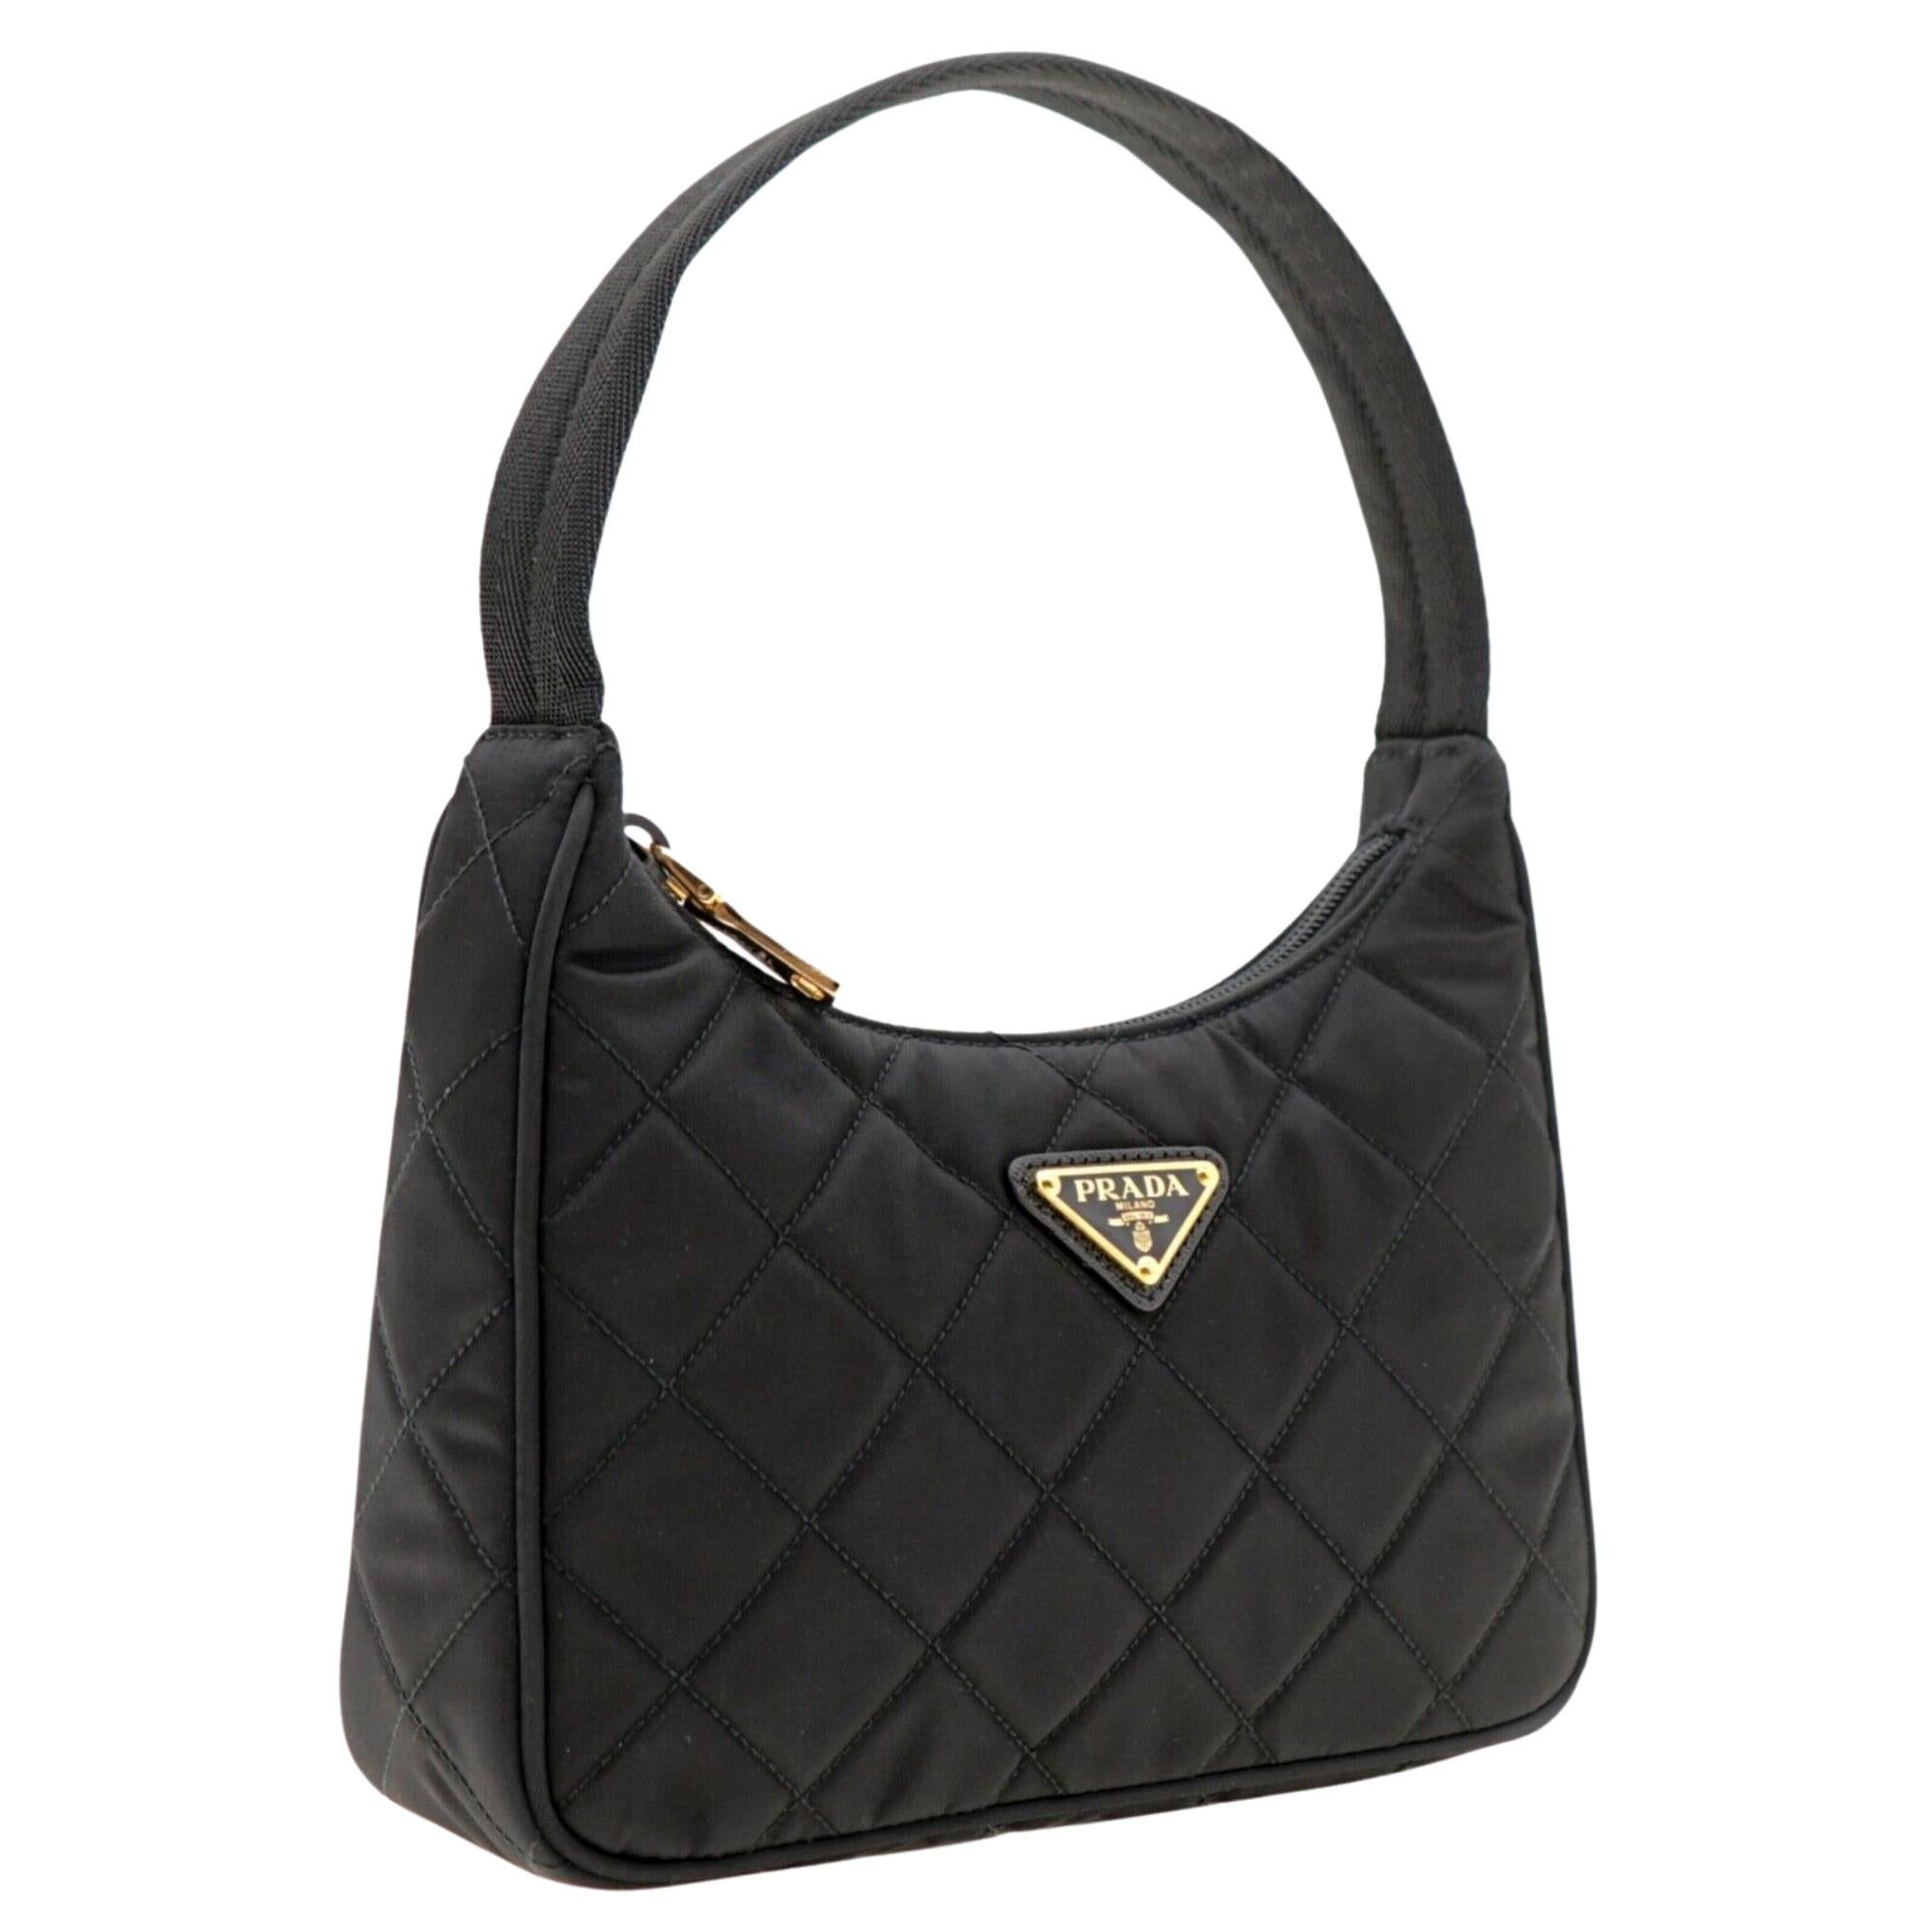 This Prada mini hobo bag is made quilted lightweight nylon in black and features zipper closure, a woven top handle and is adorned with the iconic enameled metal triangle logo. Gold colored hardware. Prada ref 1NE051.

Color: Black
Material: Tessuto